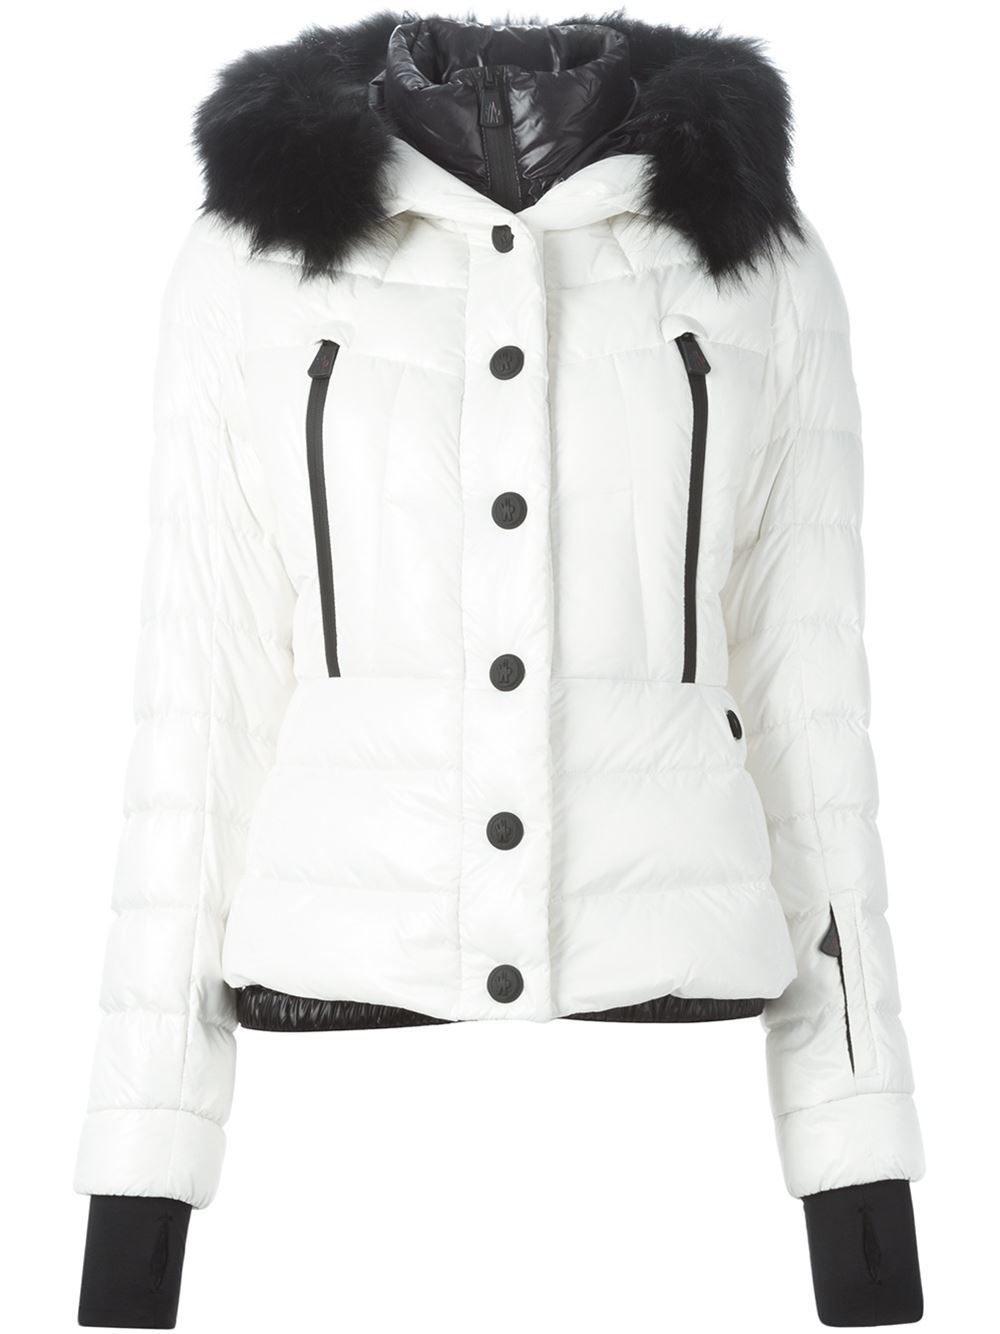 Moncler Grenoble Coyote Fur Trim Padded Jacket in White - Lyst